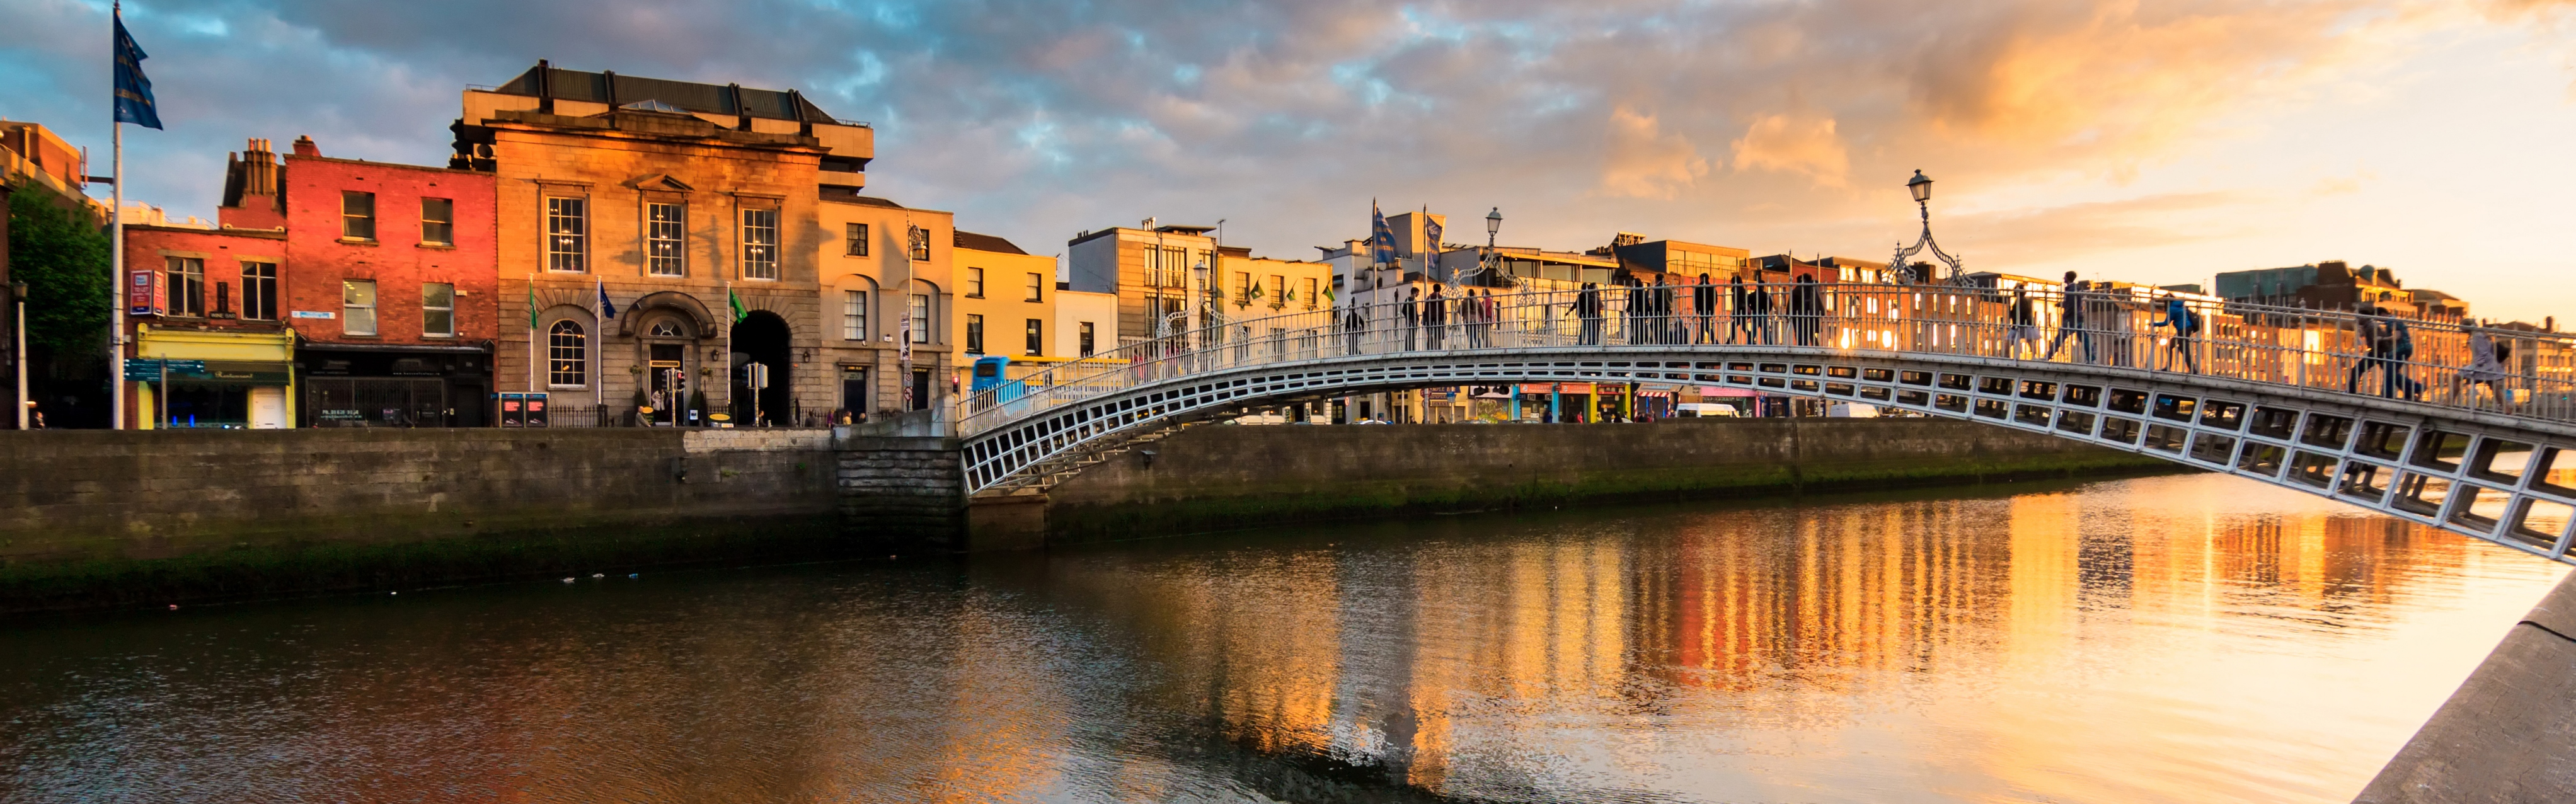 Bridge over a river in Dublin at sunset